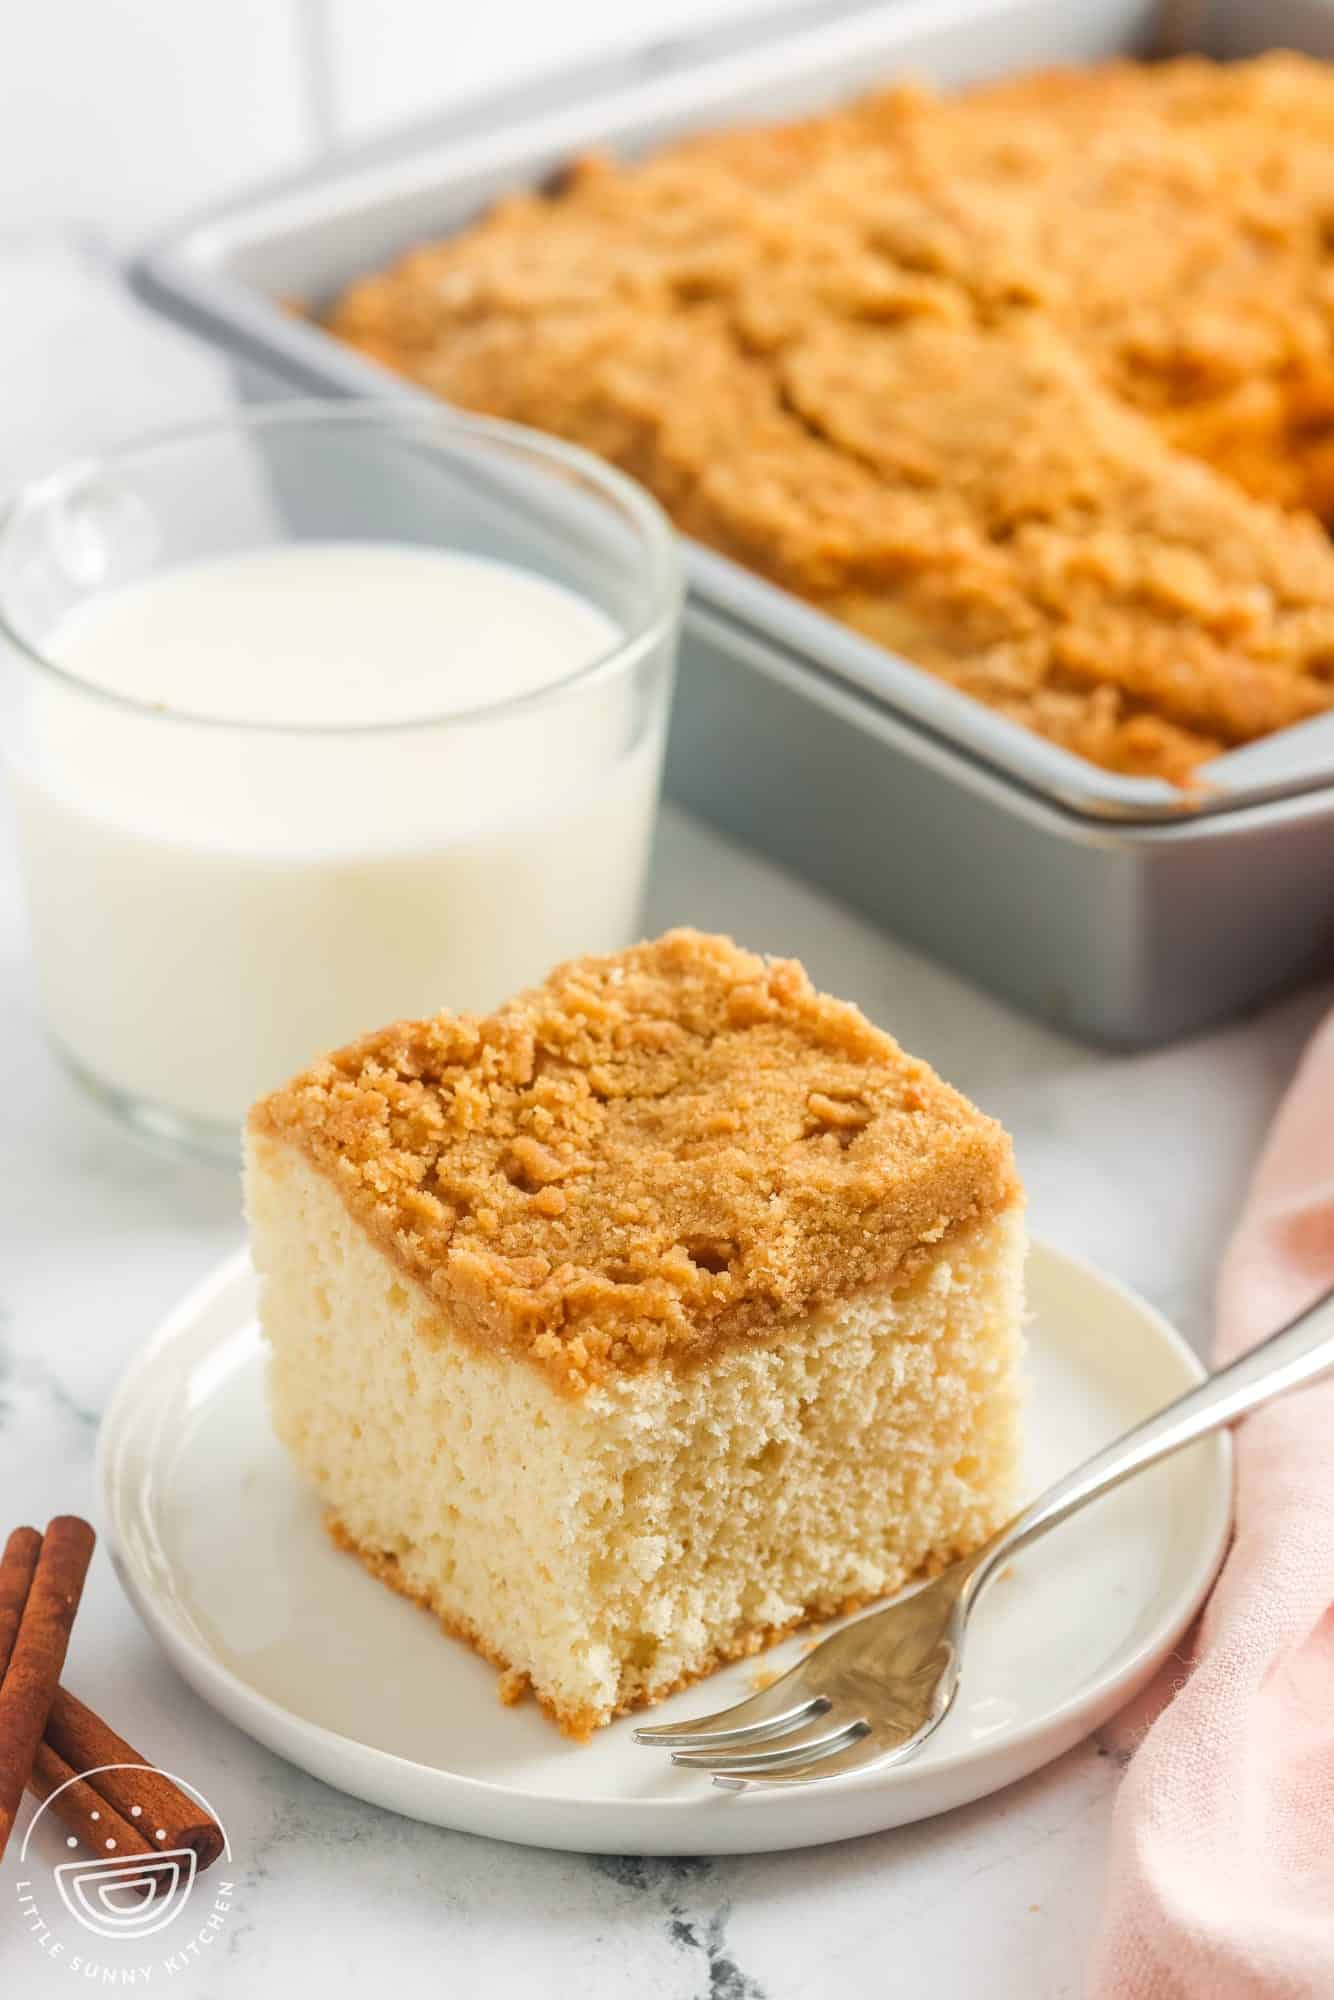 a square of fluffy bisquick coffee cake on a plate next to a glass of milk.